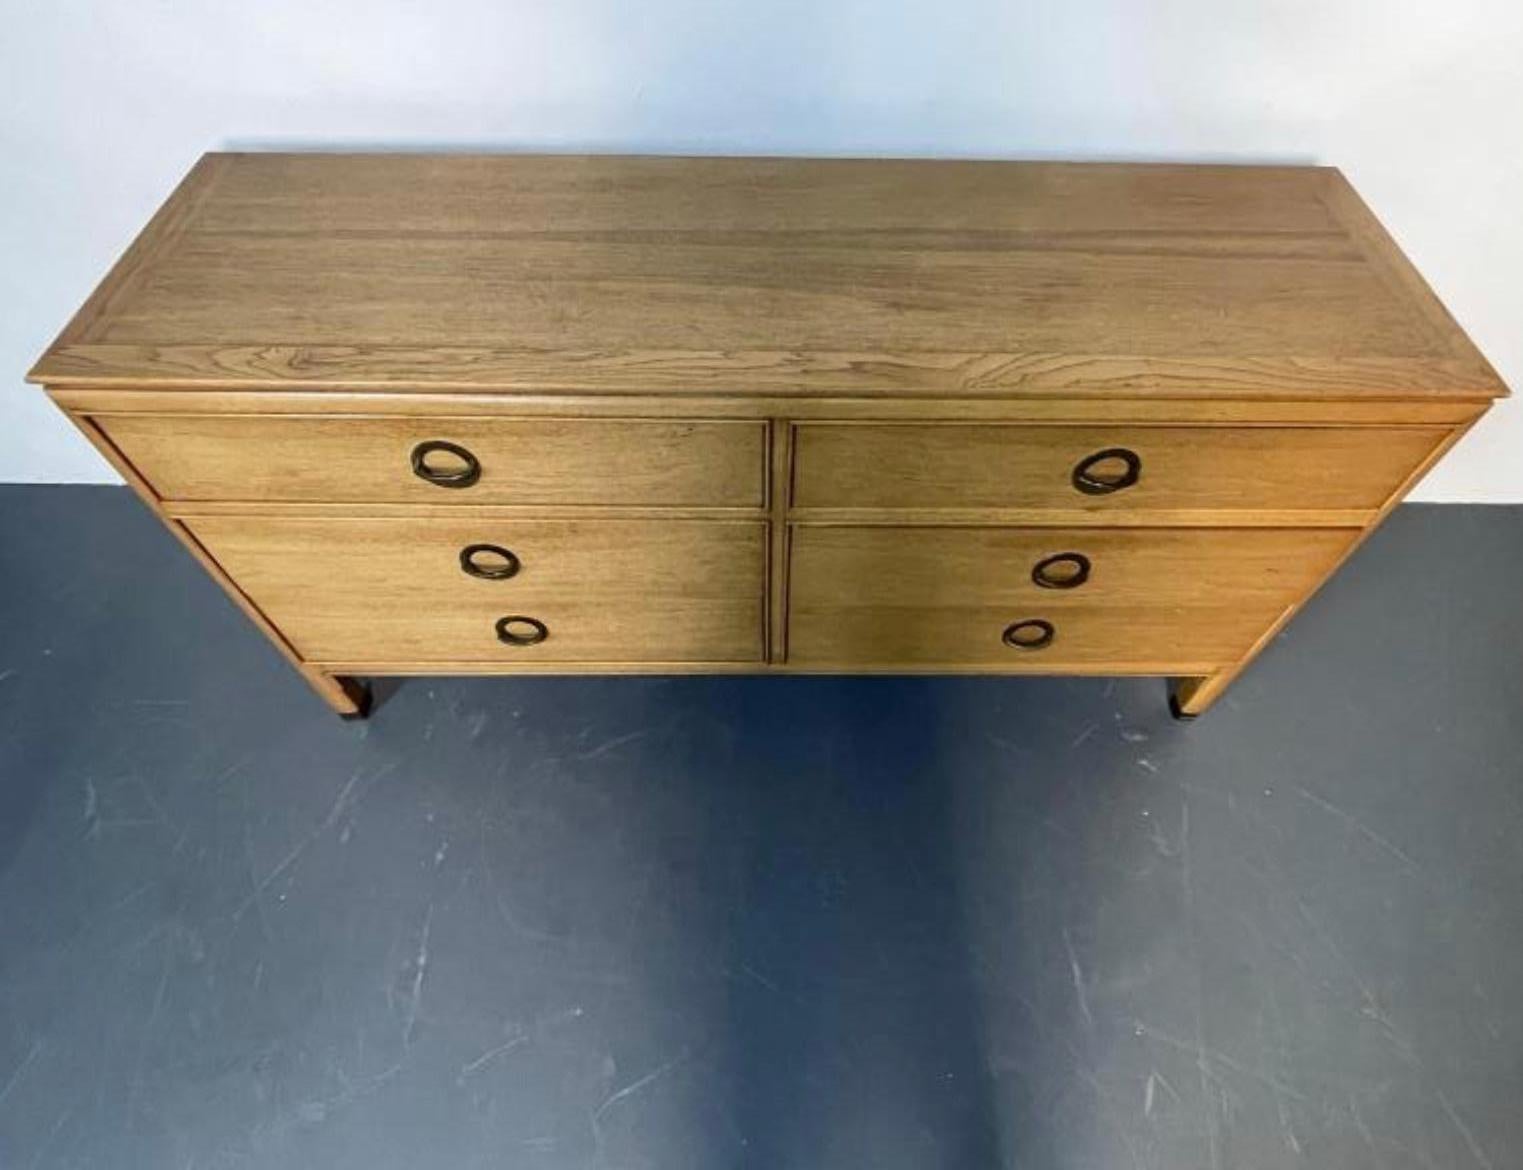 Midcentury postmodern low oak 6 drawer dresser or credenza with half ring brass pulls. Light oak dresser with 6 drawer’s great design circa 1970. Made in USA. Style of Dunbar. Located in Brooklyn NYC.
Measures 62” L x 18.5” D x 31” H.